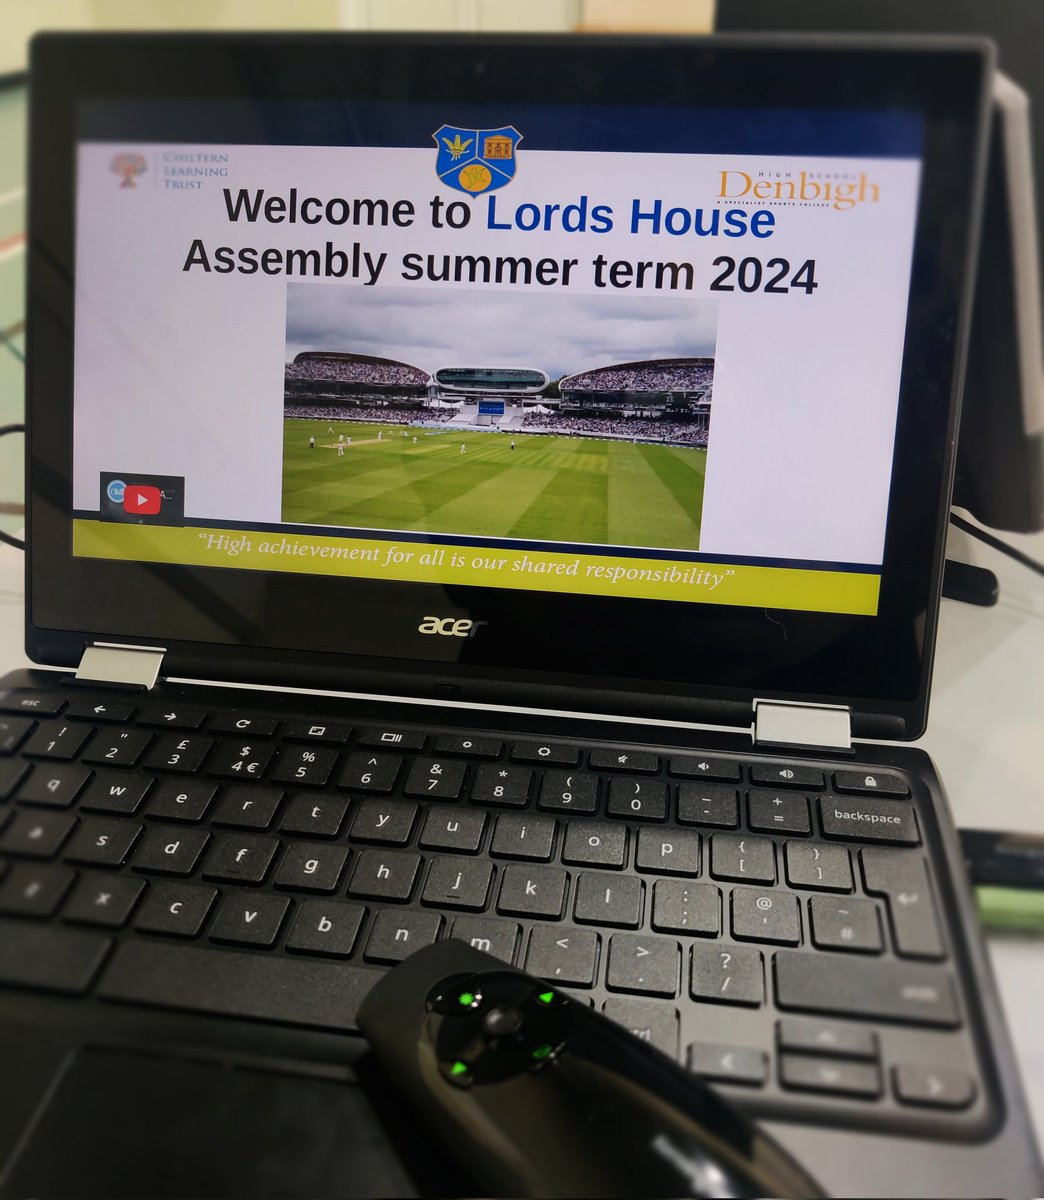 Pleased to have led my very first assembly with Lords House this morning. Looking forward to the exciting and enriching activities coming up this term and a major comeback from Lords House! 🤞🏻🏏 @DenbighHigh